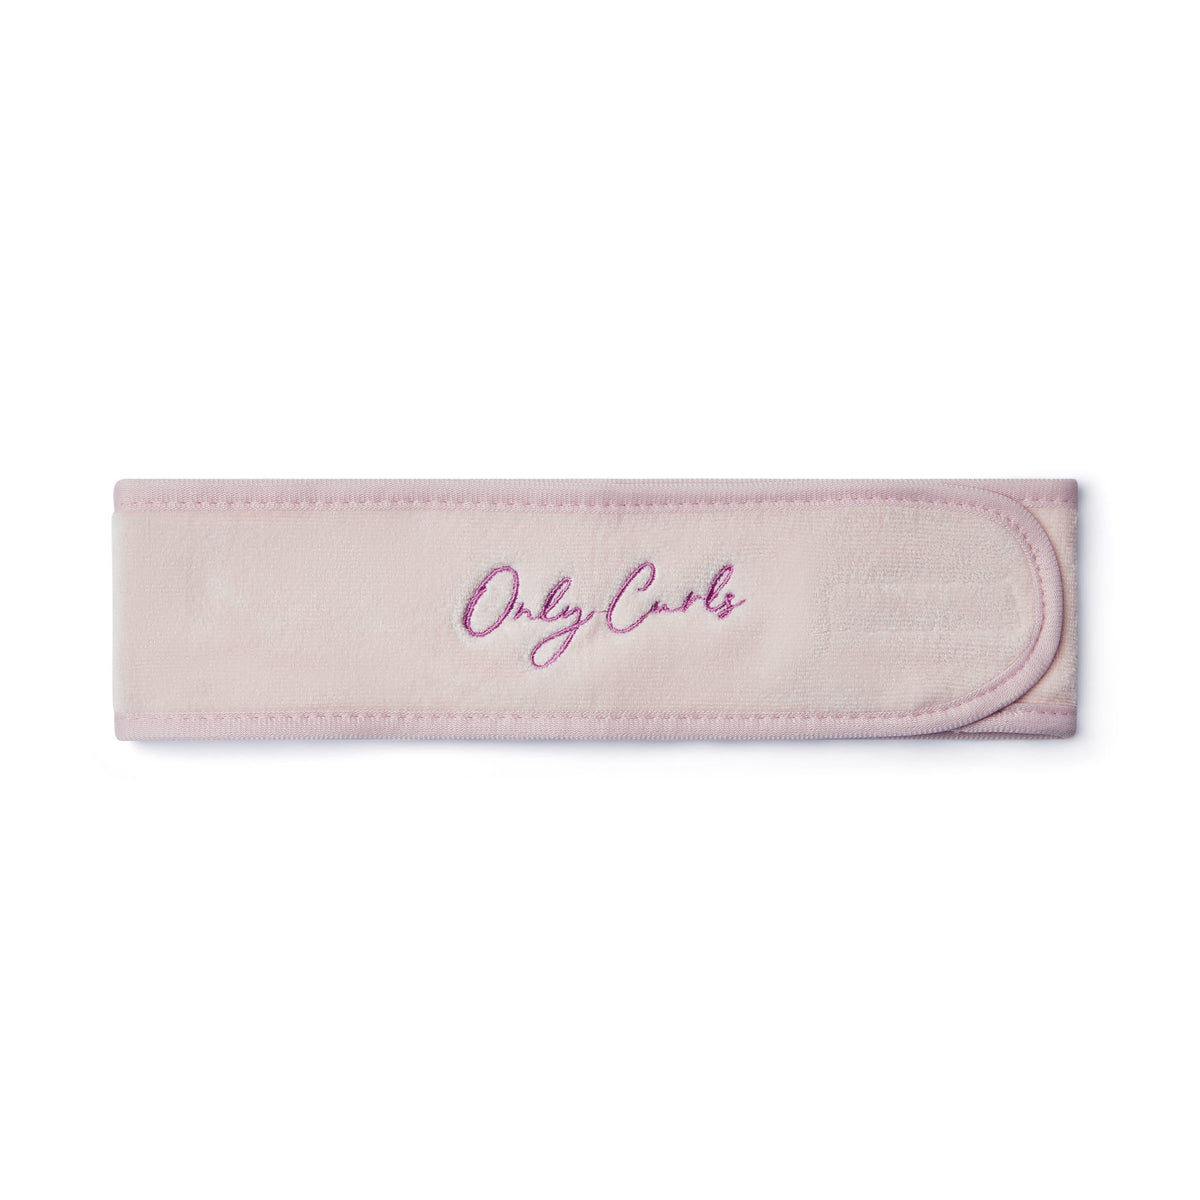 Only Curls Microfibre Headband - Pink - Only Curls